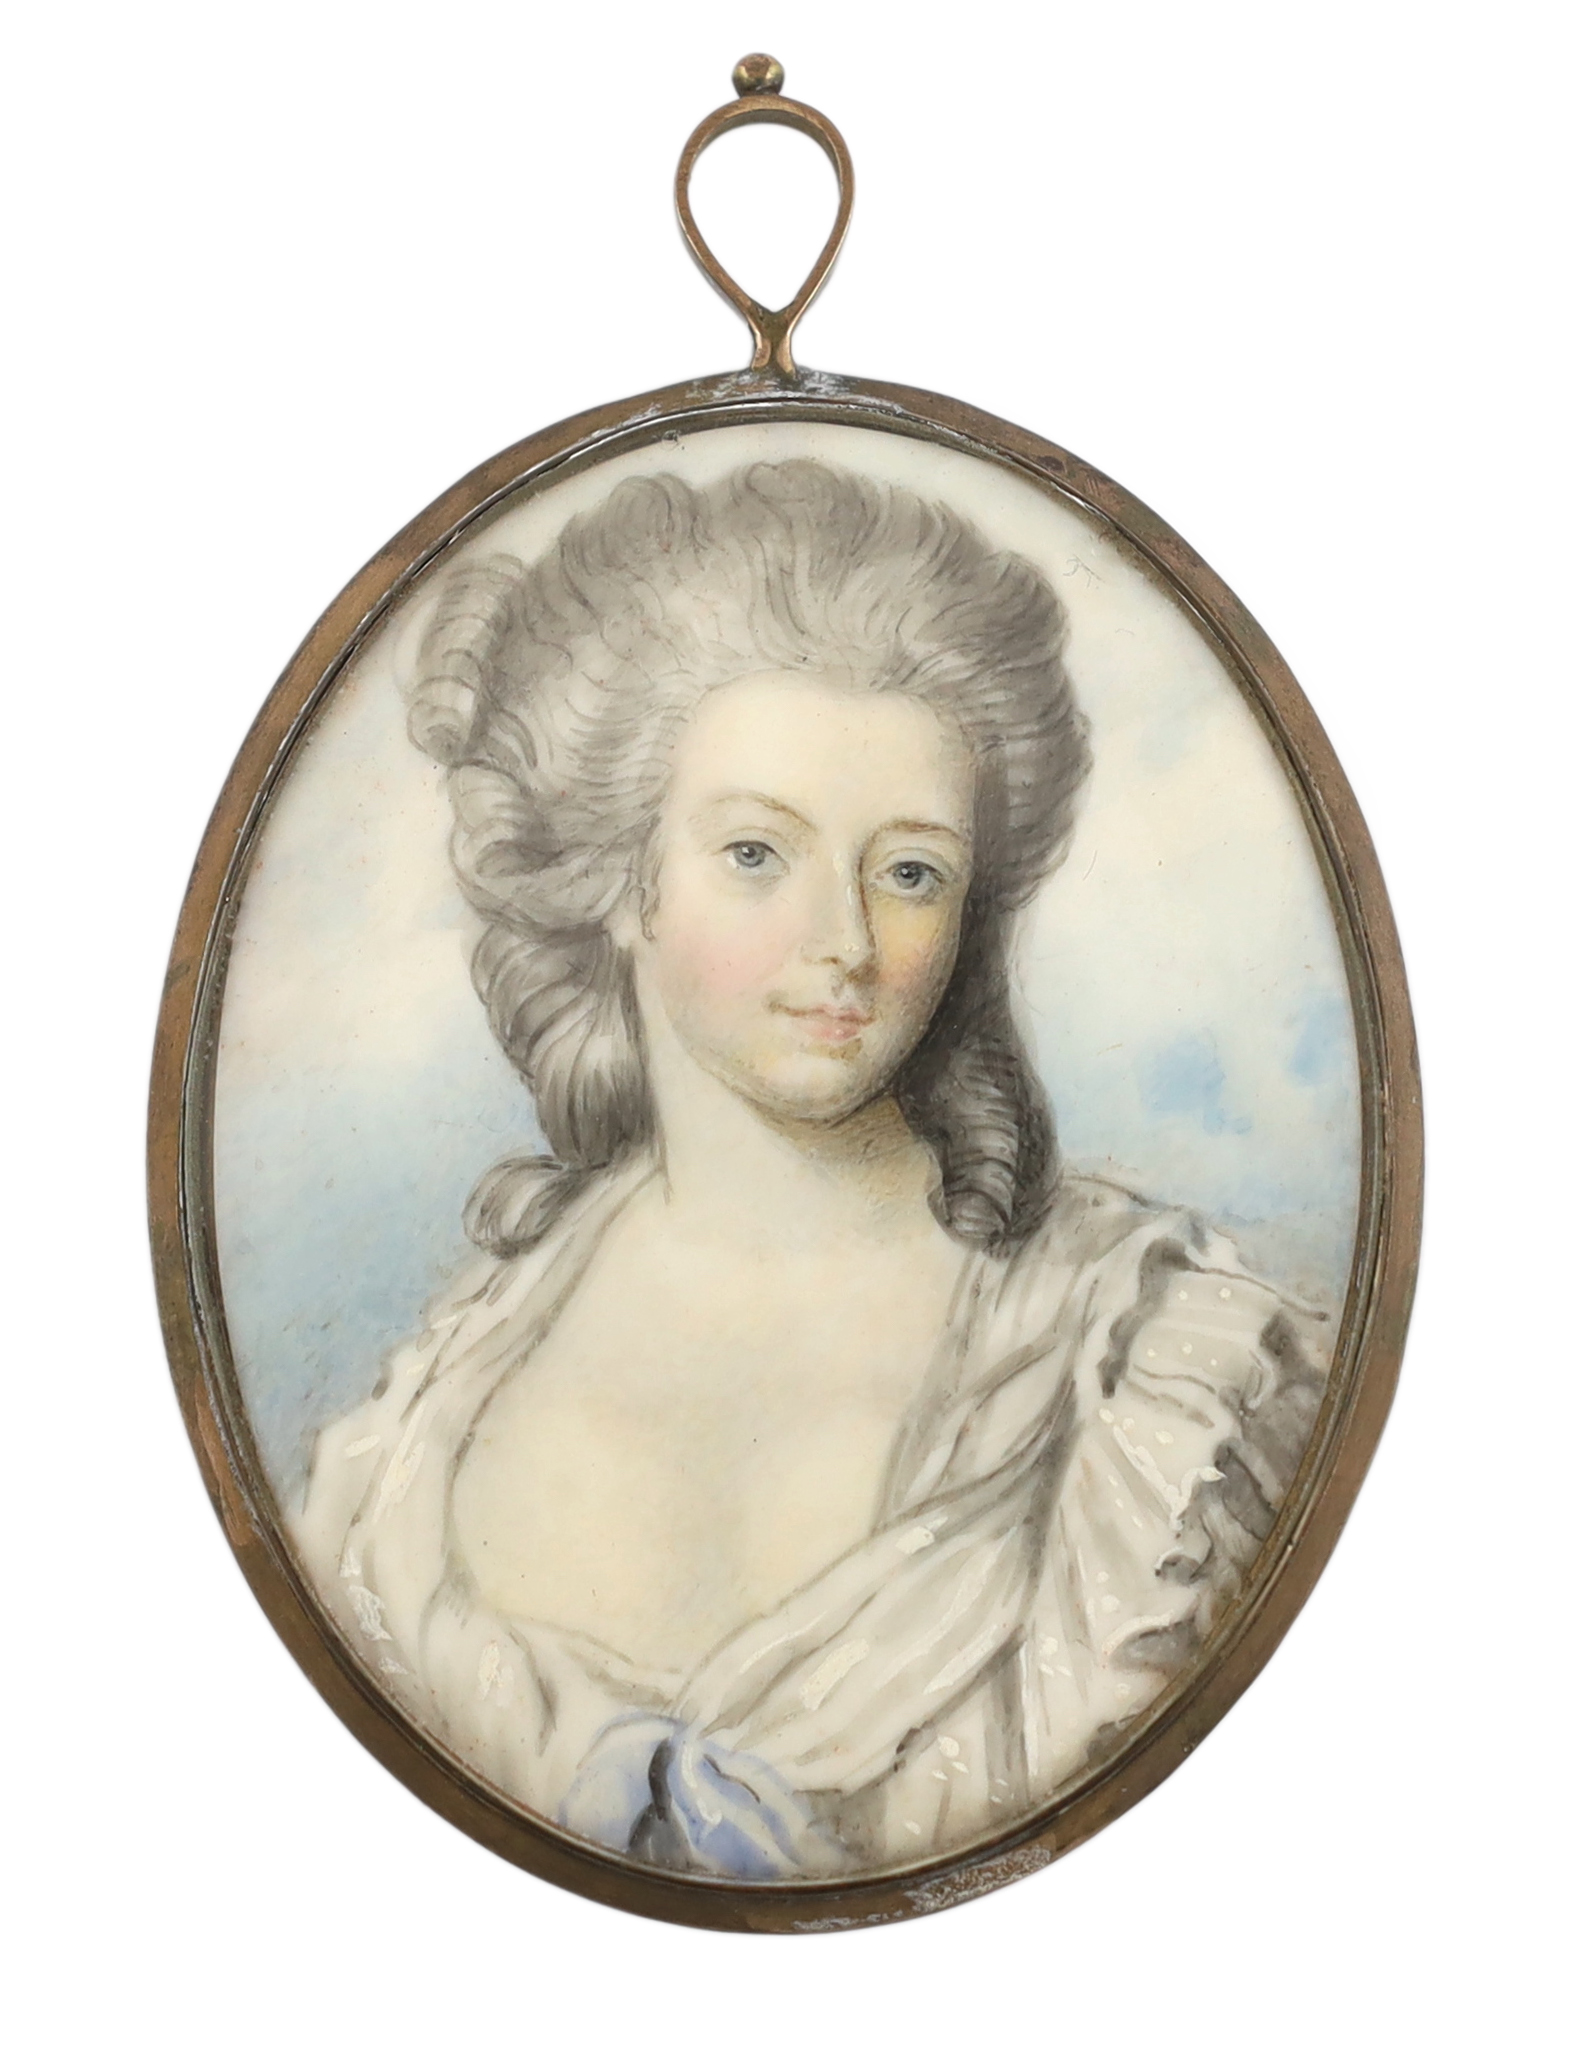 English School circa 1790, Portrait miniature of a lady, watercolour on ivory, 6.4 x 5.2cm. CITES Submission reference 8PWTN3WD